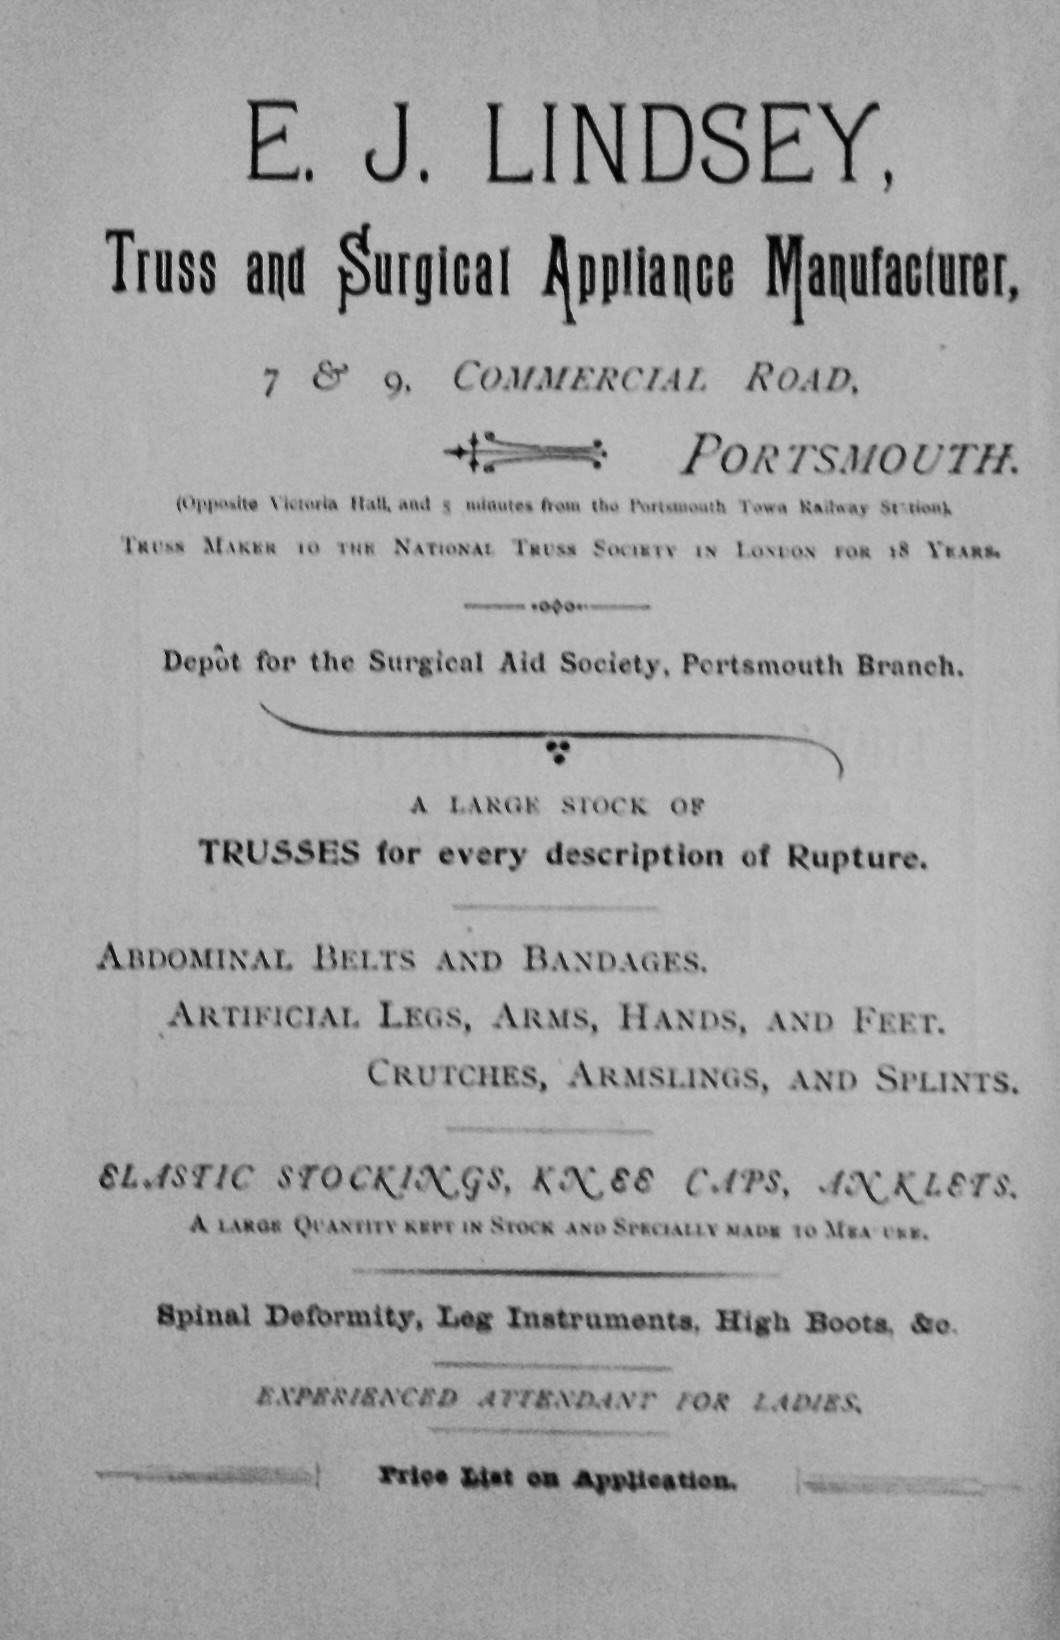 E. J. Lindsey, Truss and Surgical Appliance Manufacturer, 7 & 9 Commercial 